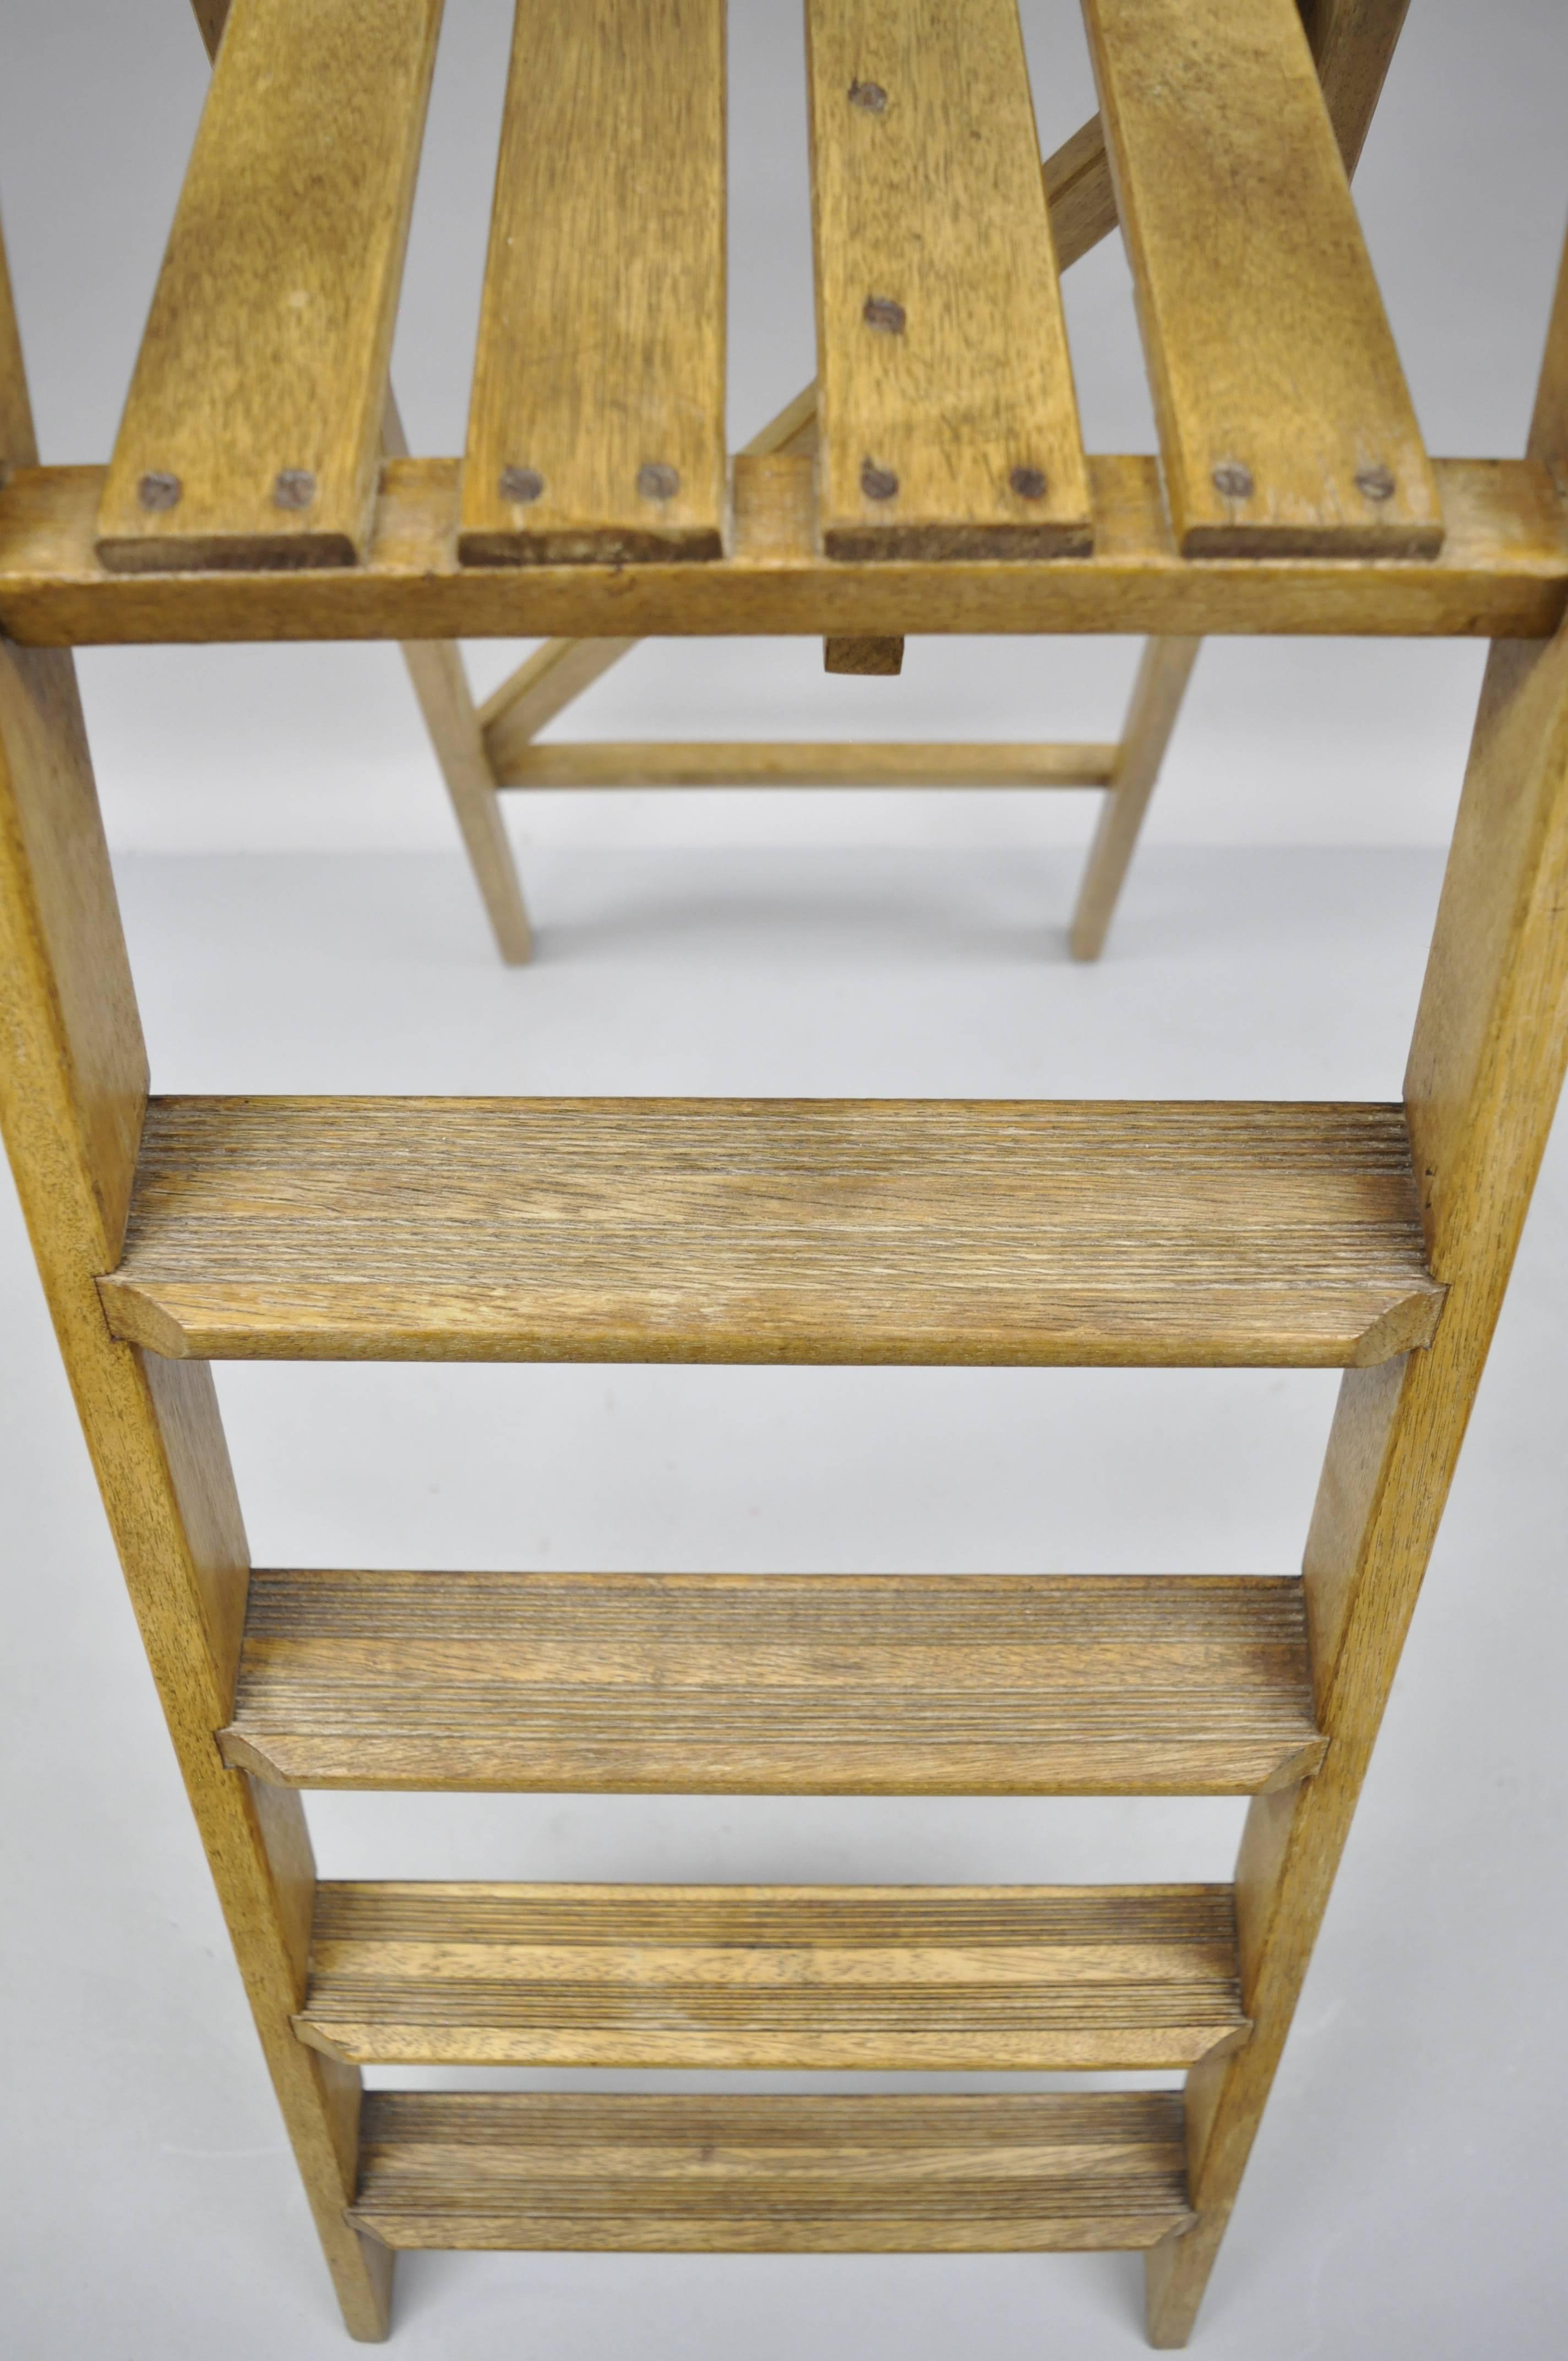 Wooden Ladder Stairs Four Step Library Book Shelf Kitchen Primitive Rustic 2